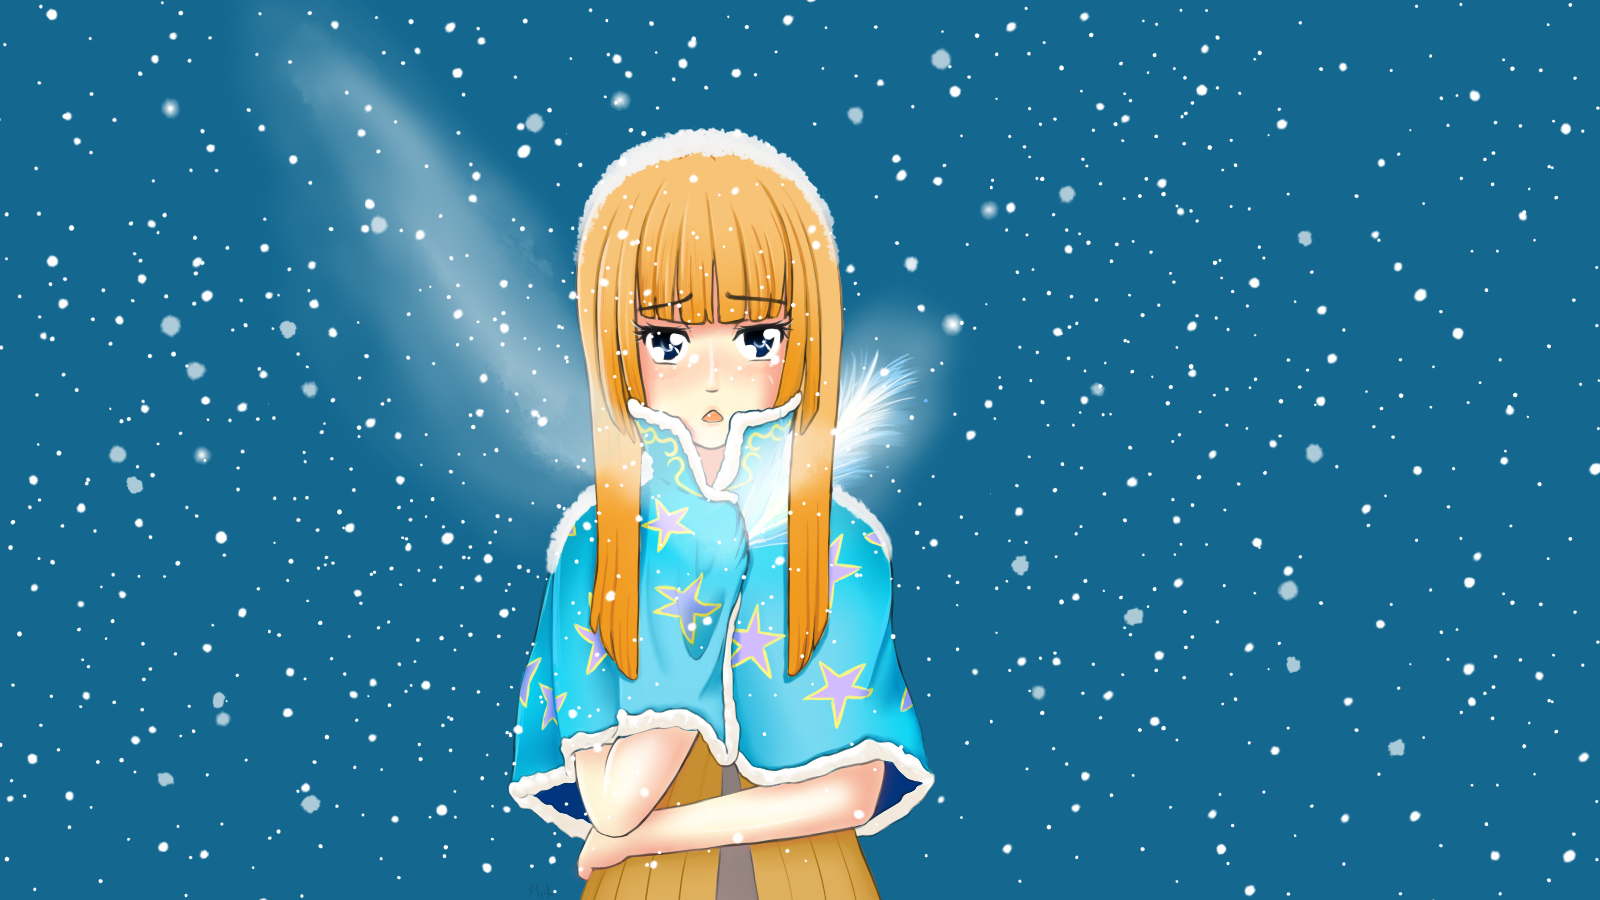 Tried for you for the new year) - New Year, Winter, Anime, My, Art, Fan art